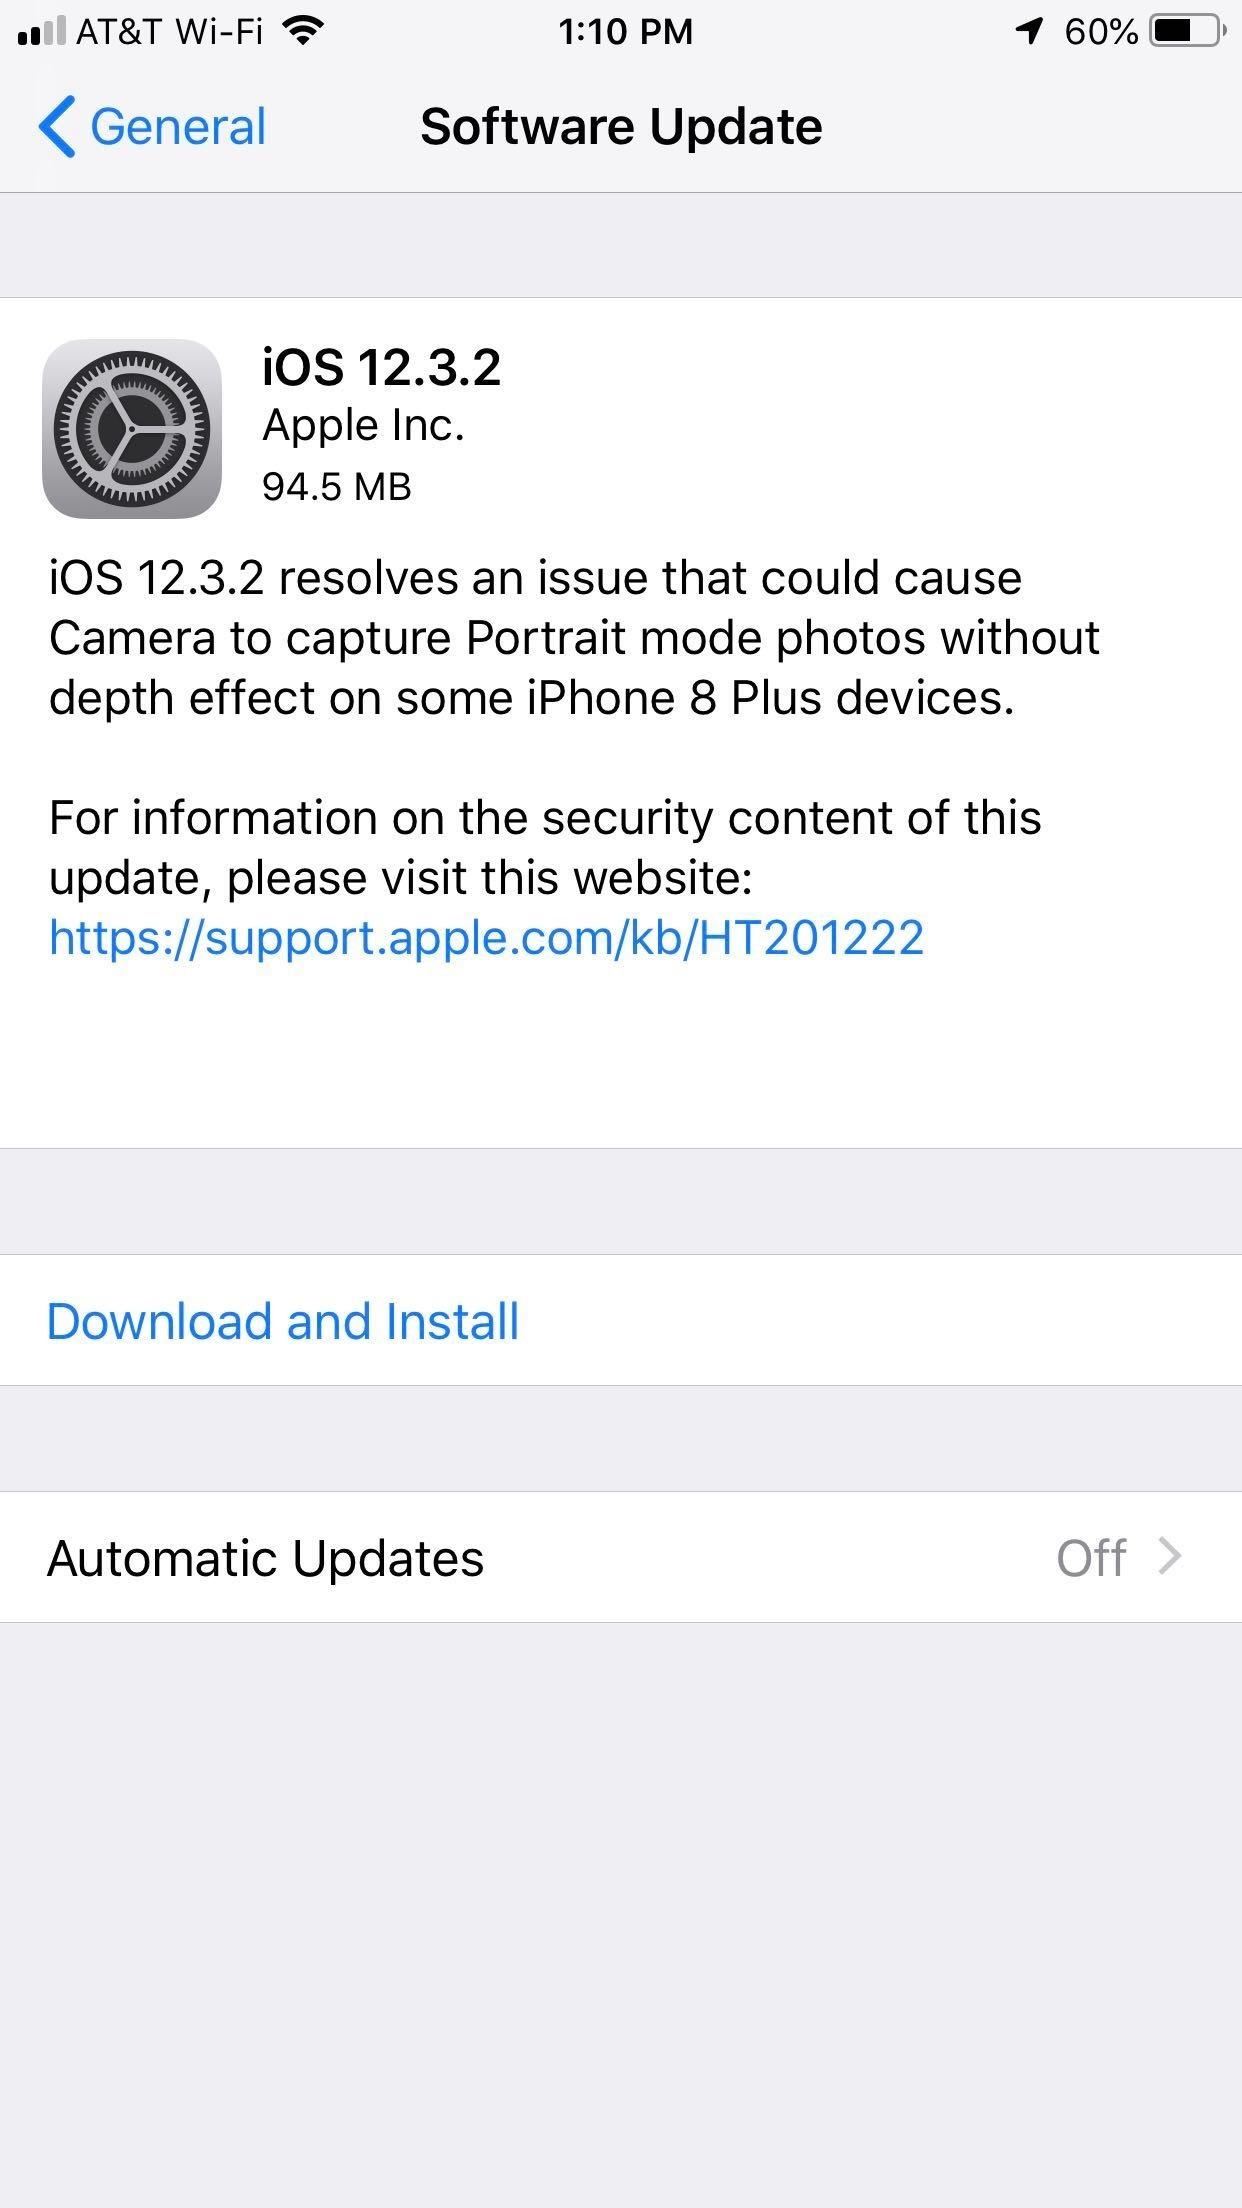 Apple Just Released iOS 12.3.2 with Fix for Portrait Mode on iPhone 8 Plus